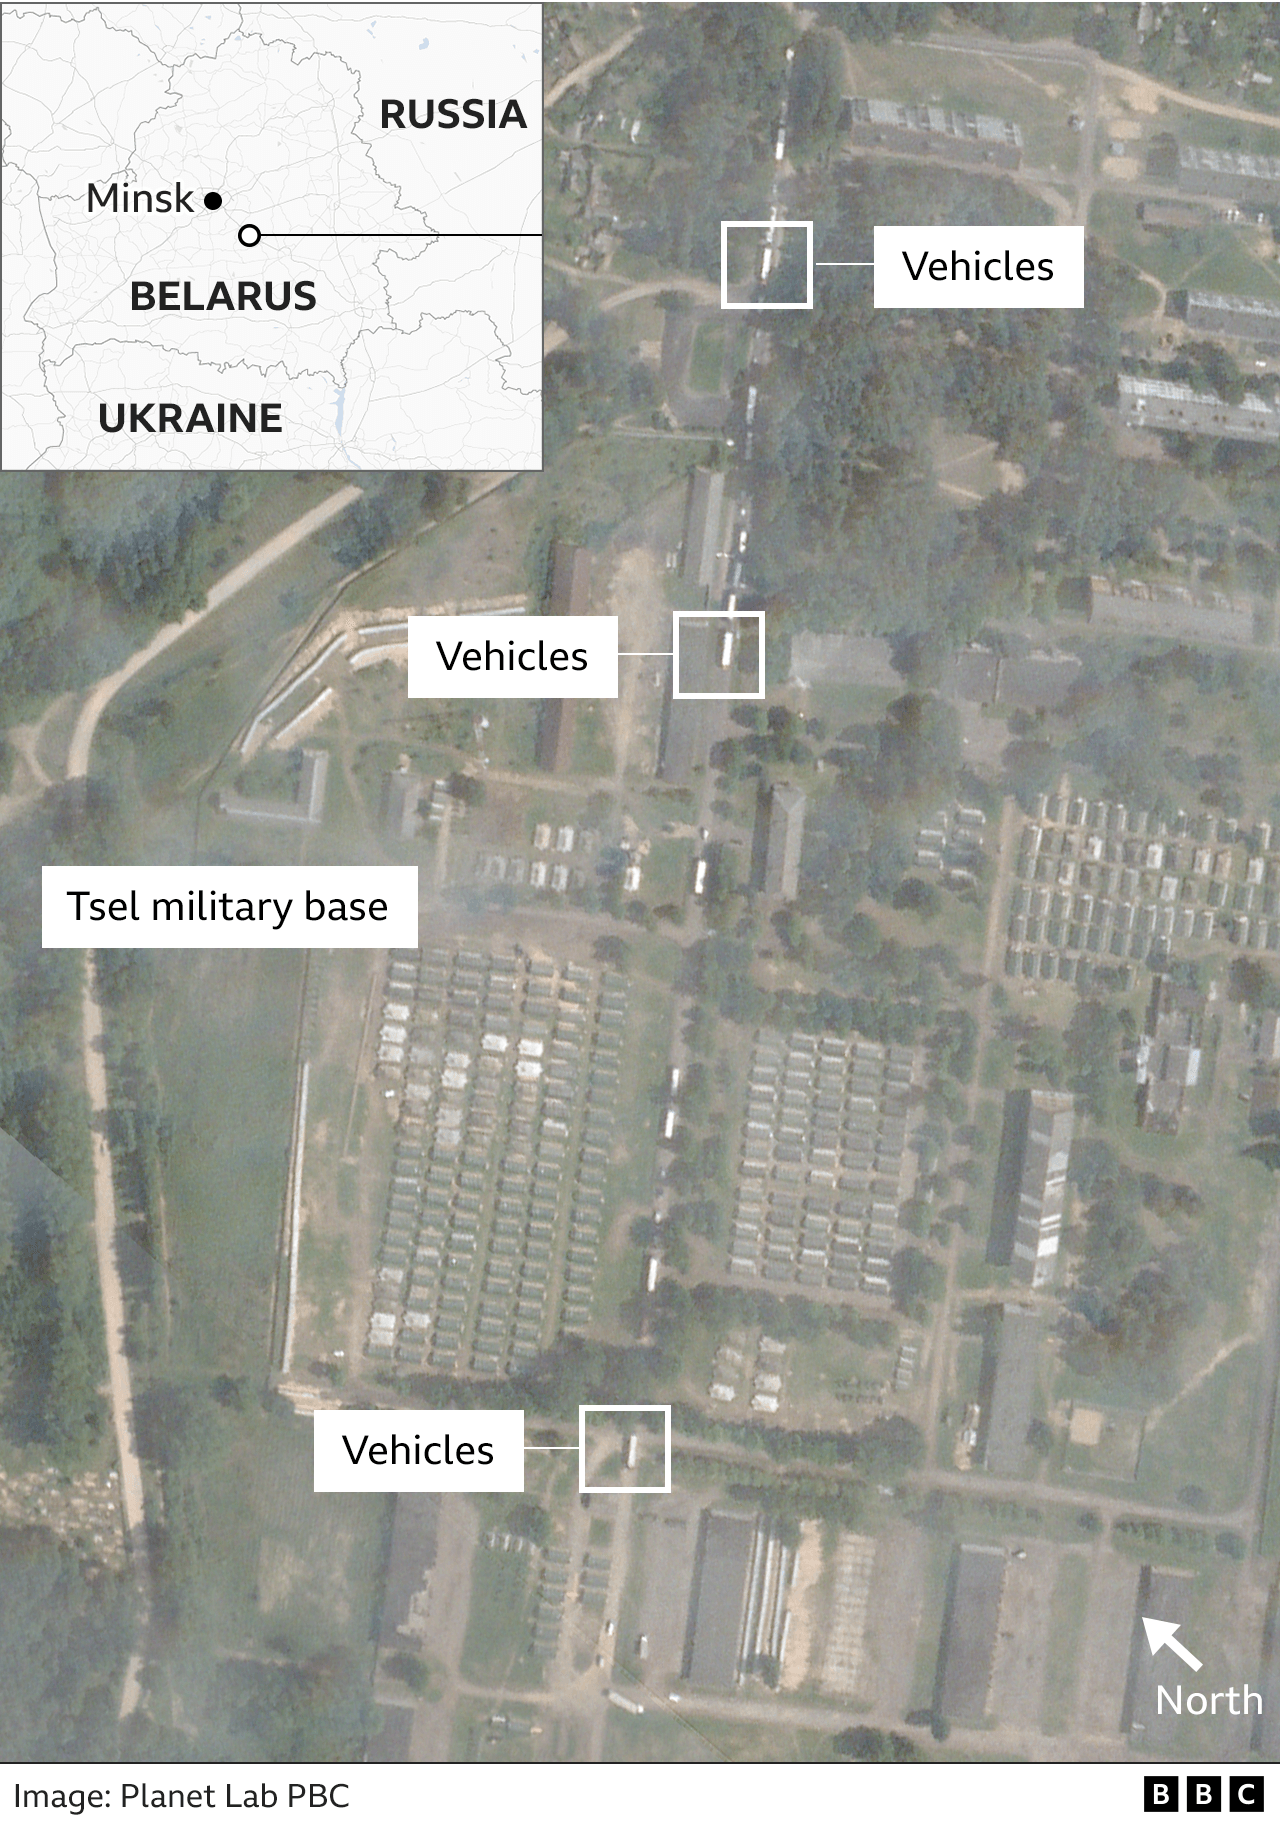 A satellite image showing the Tsel military base in Belarus